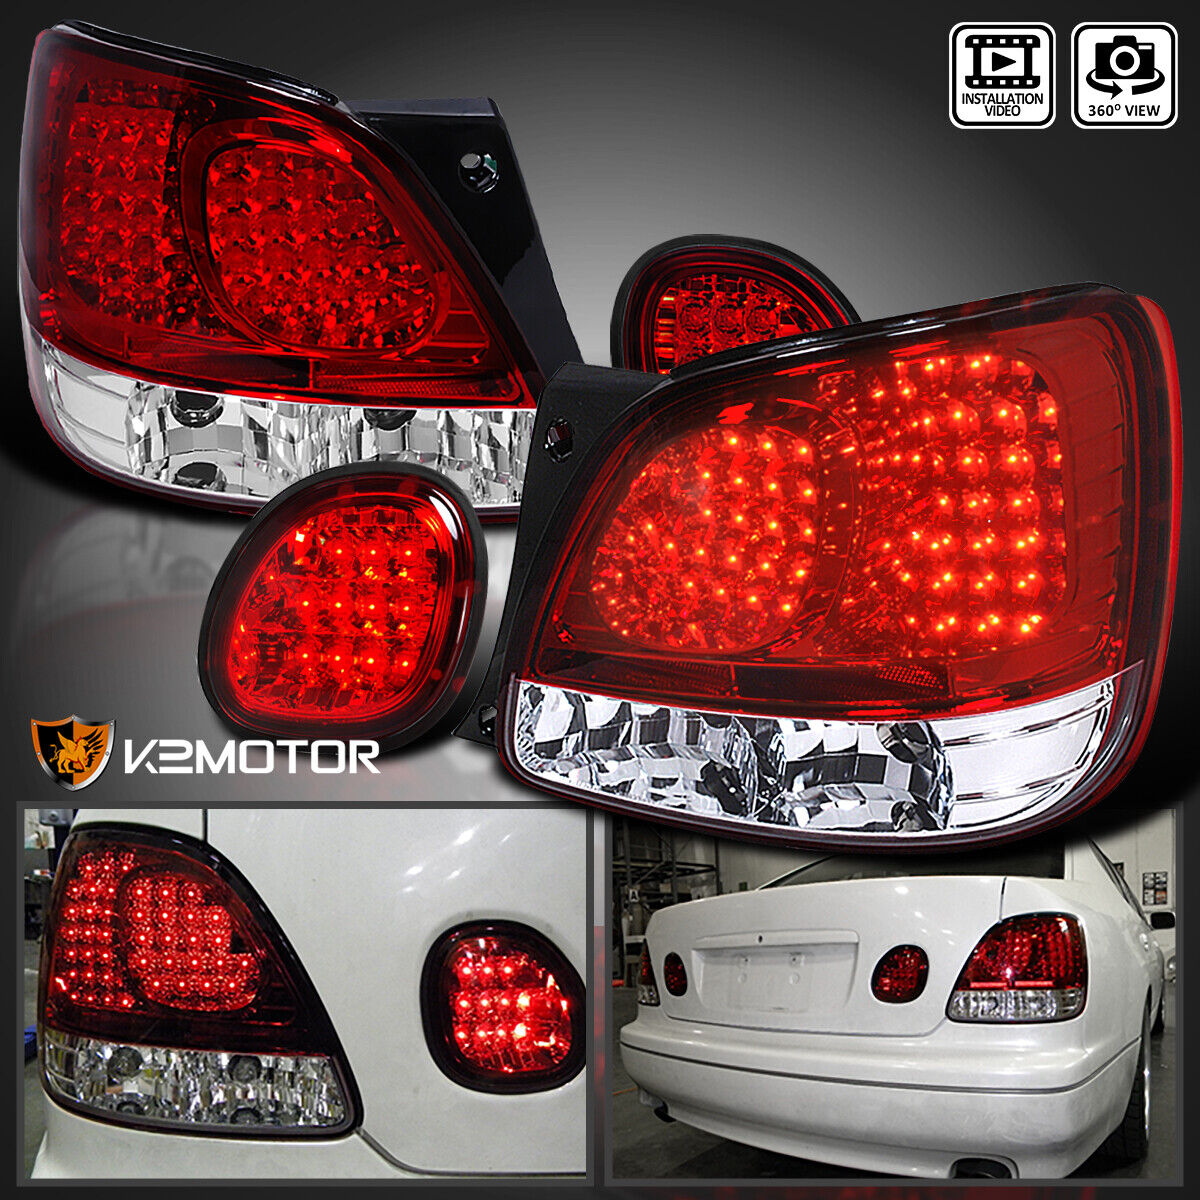 Red/Clear Fits 98-05 Lexus GS300 GS400 GS430 LED Rear Tail+Trunk Lamp Light Pair